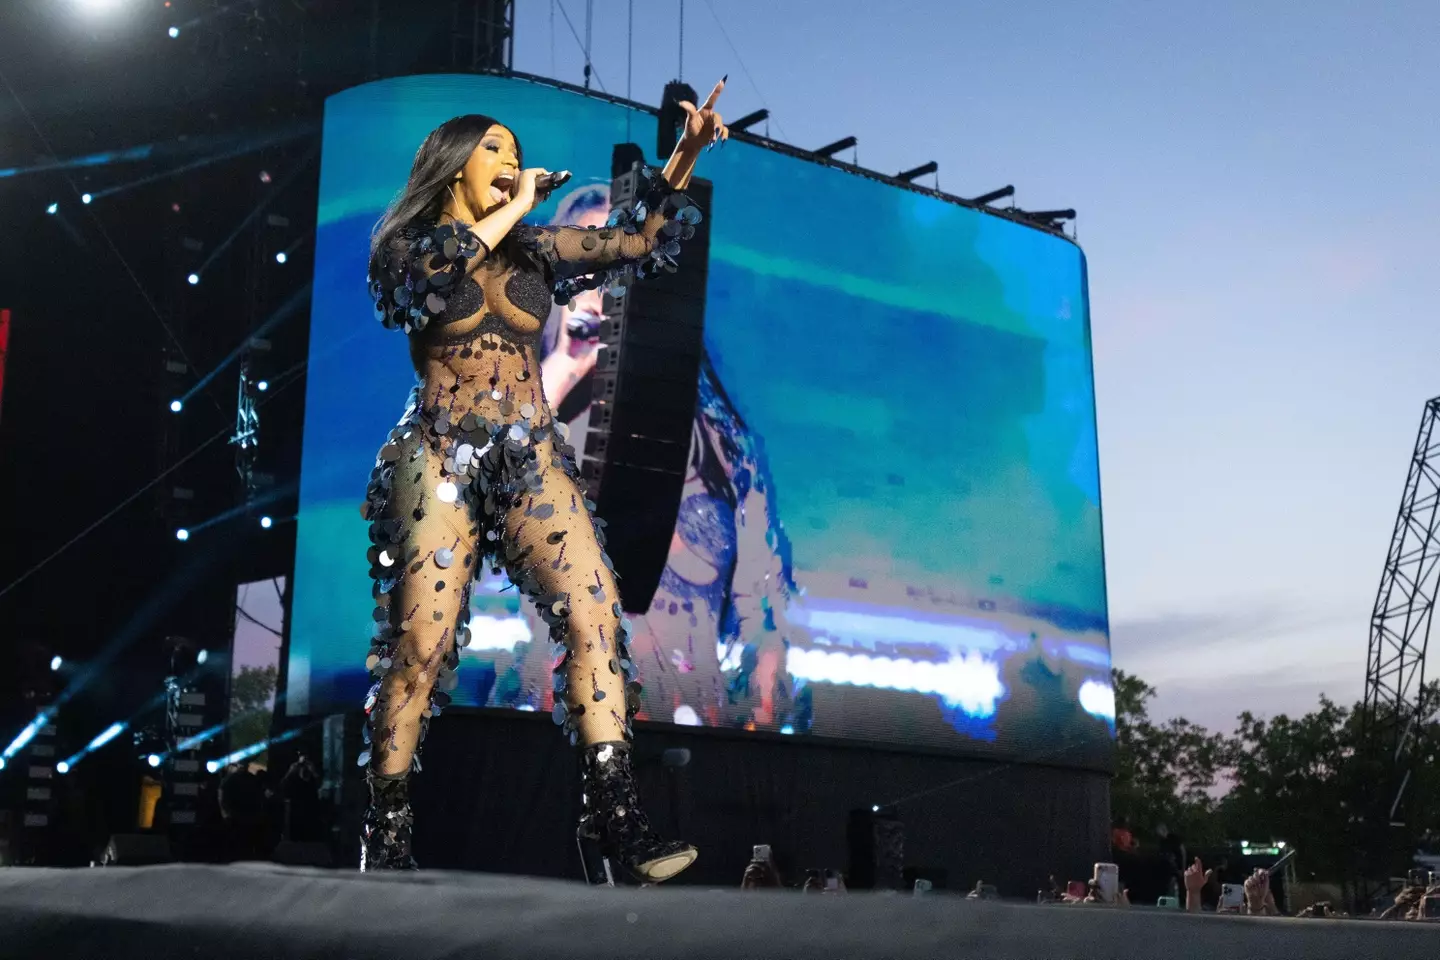 Cardi B performing at the Wireless Festival at Finsbury Park in London.